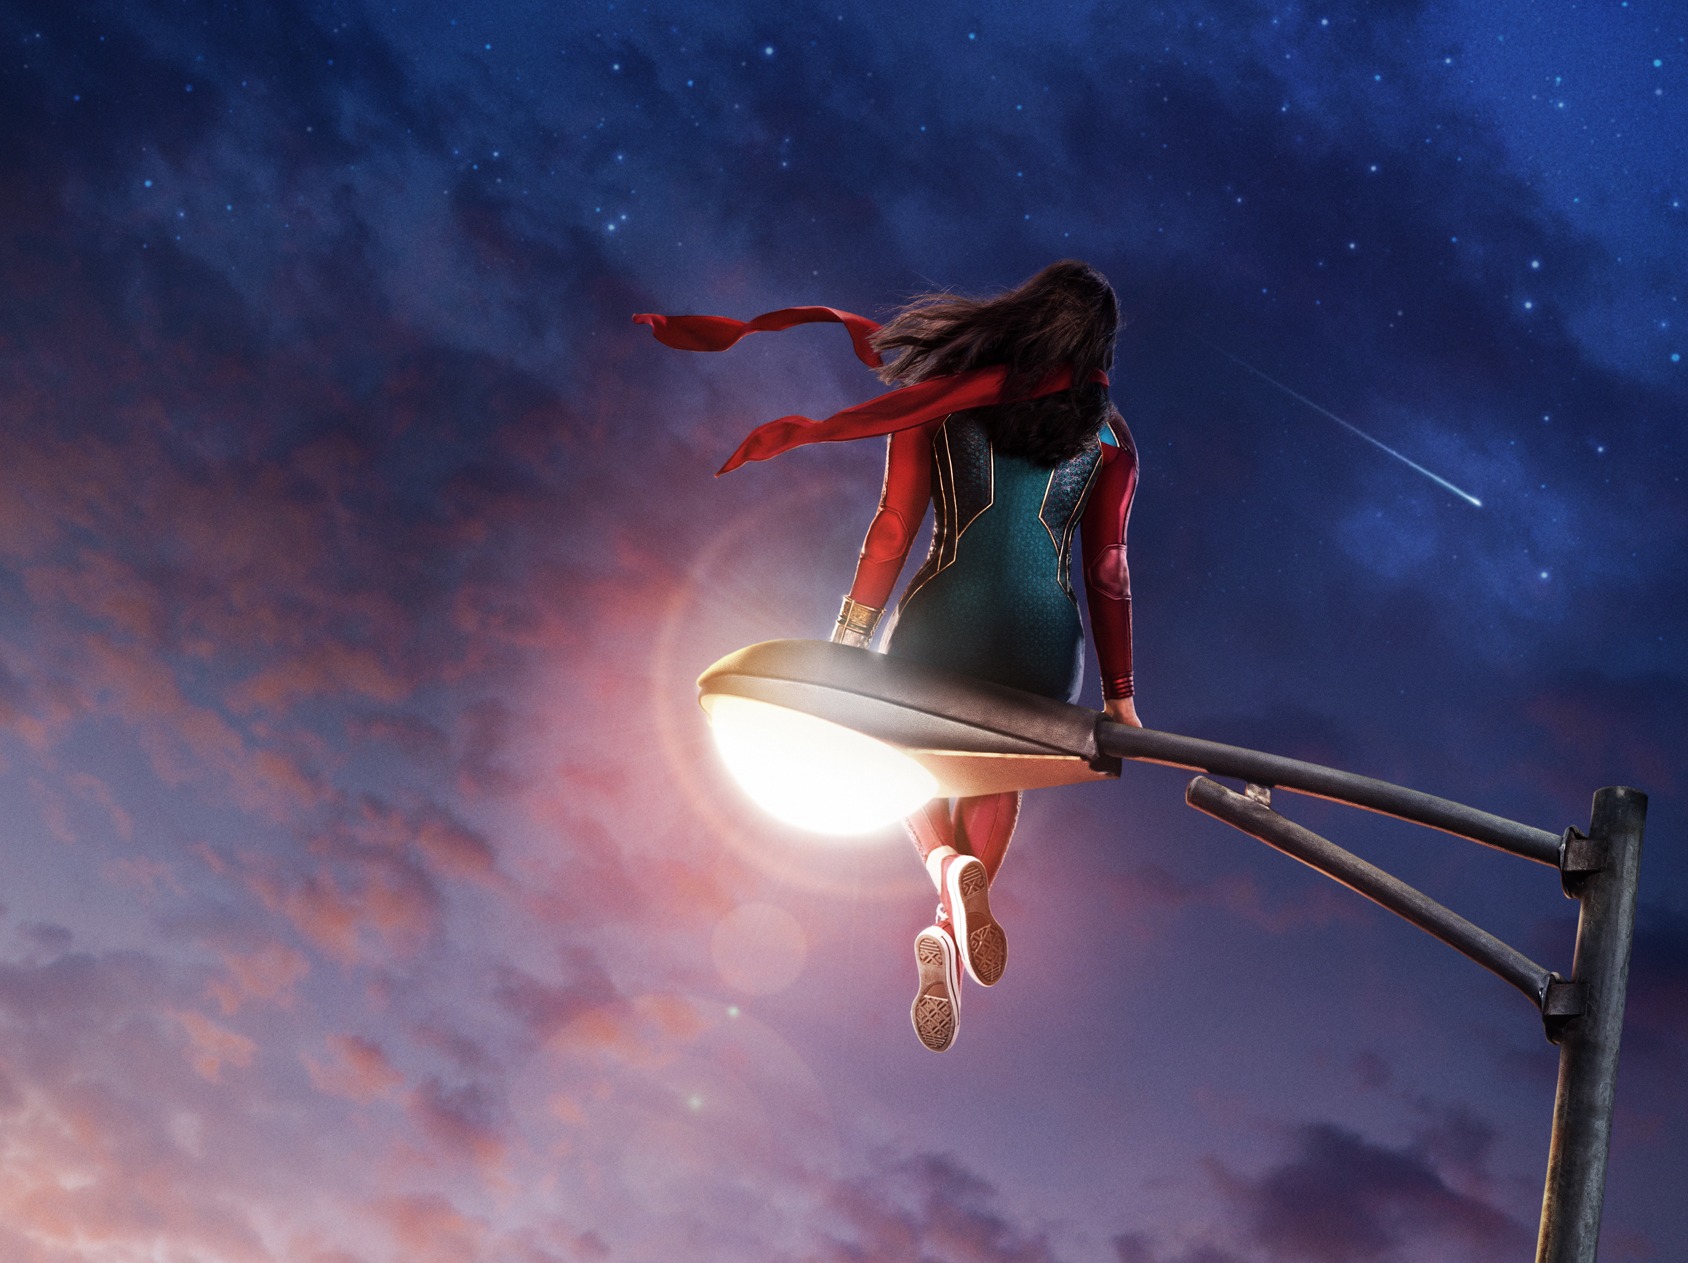 The top of the poster for 'Ms. Marvel,' which has a June release date. It shows Kamala Khan sitting on a street lamp in her costume.